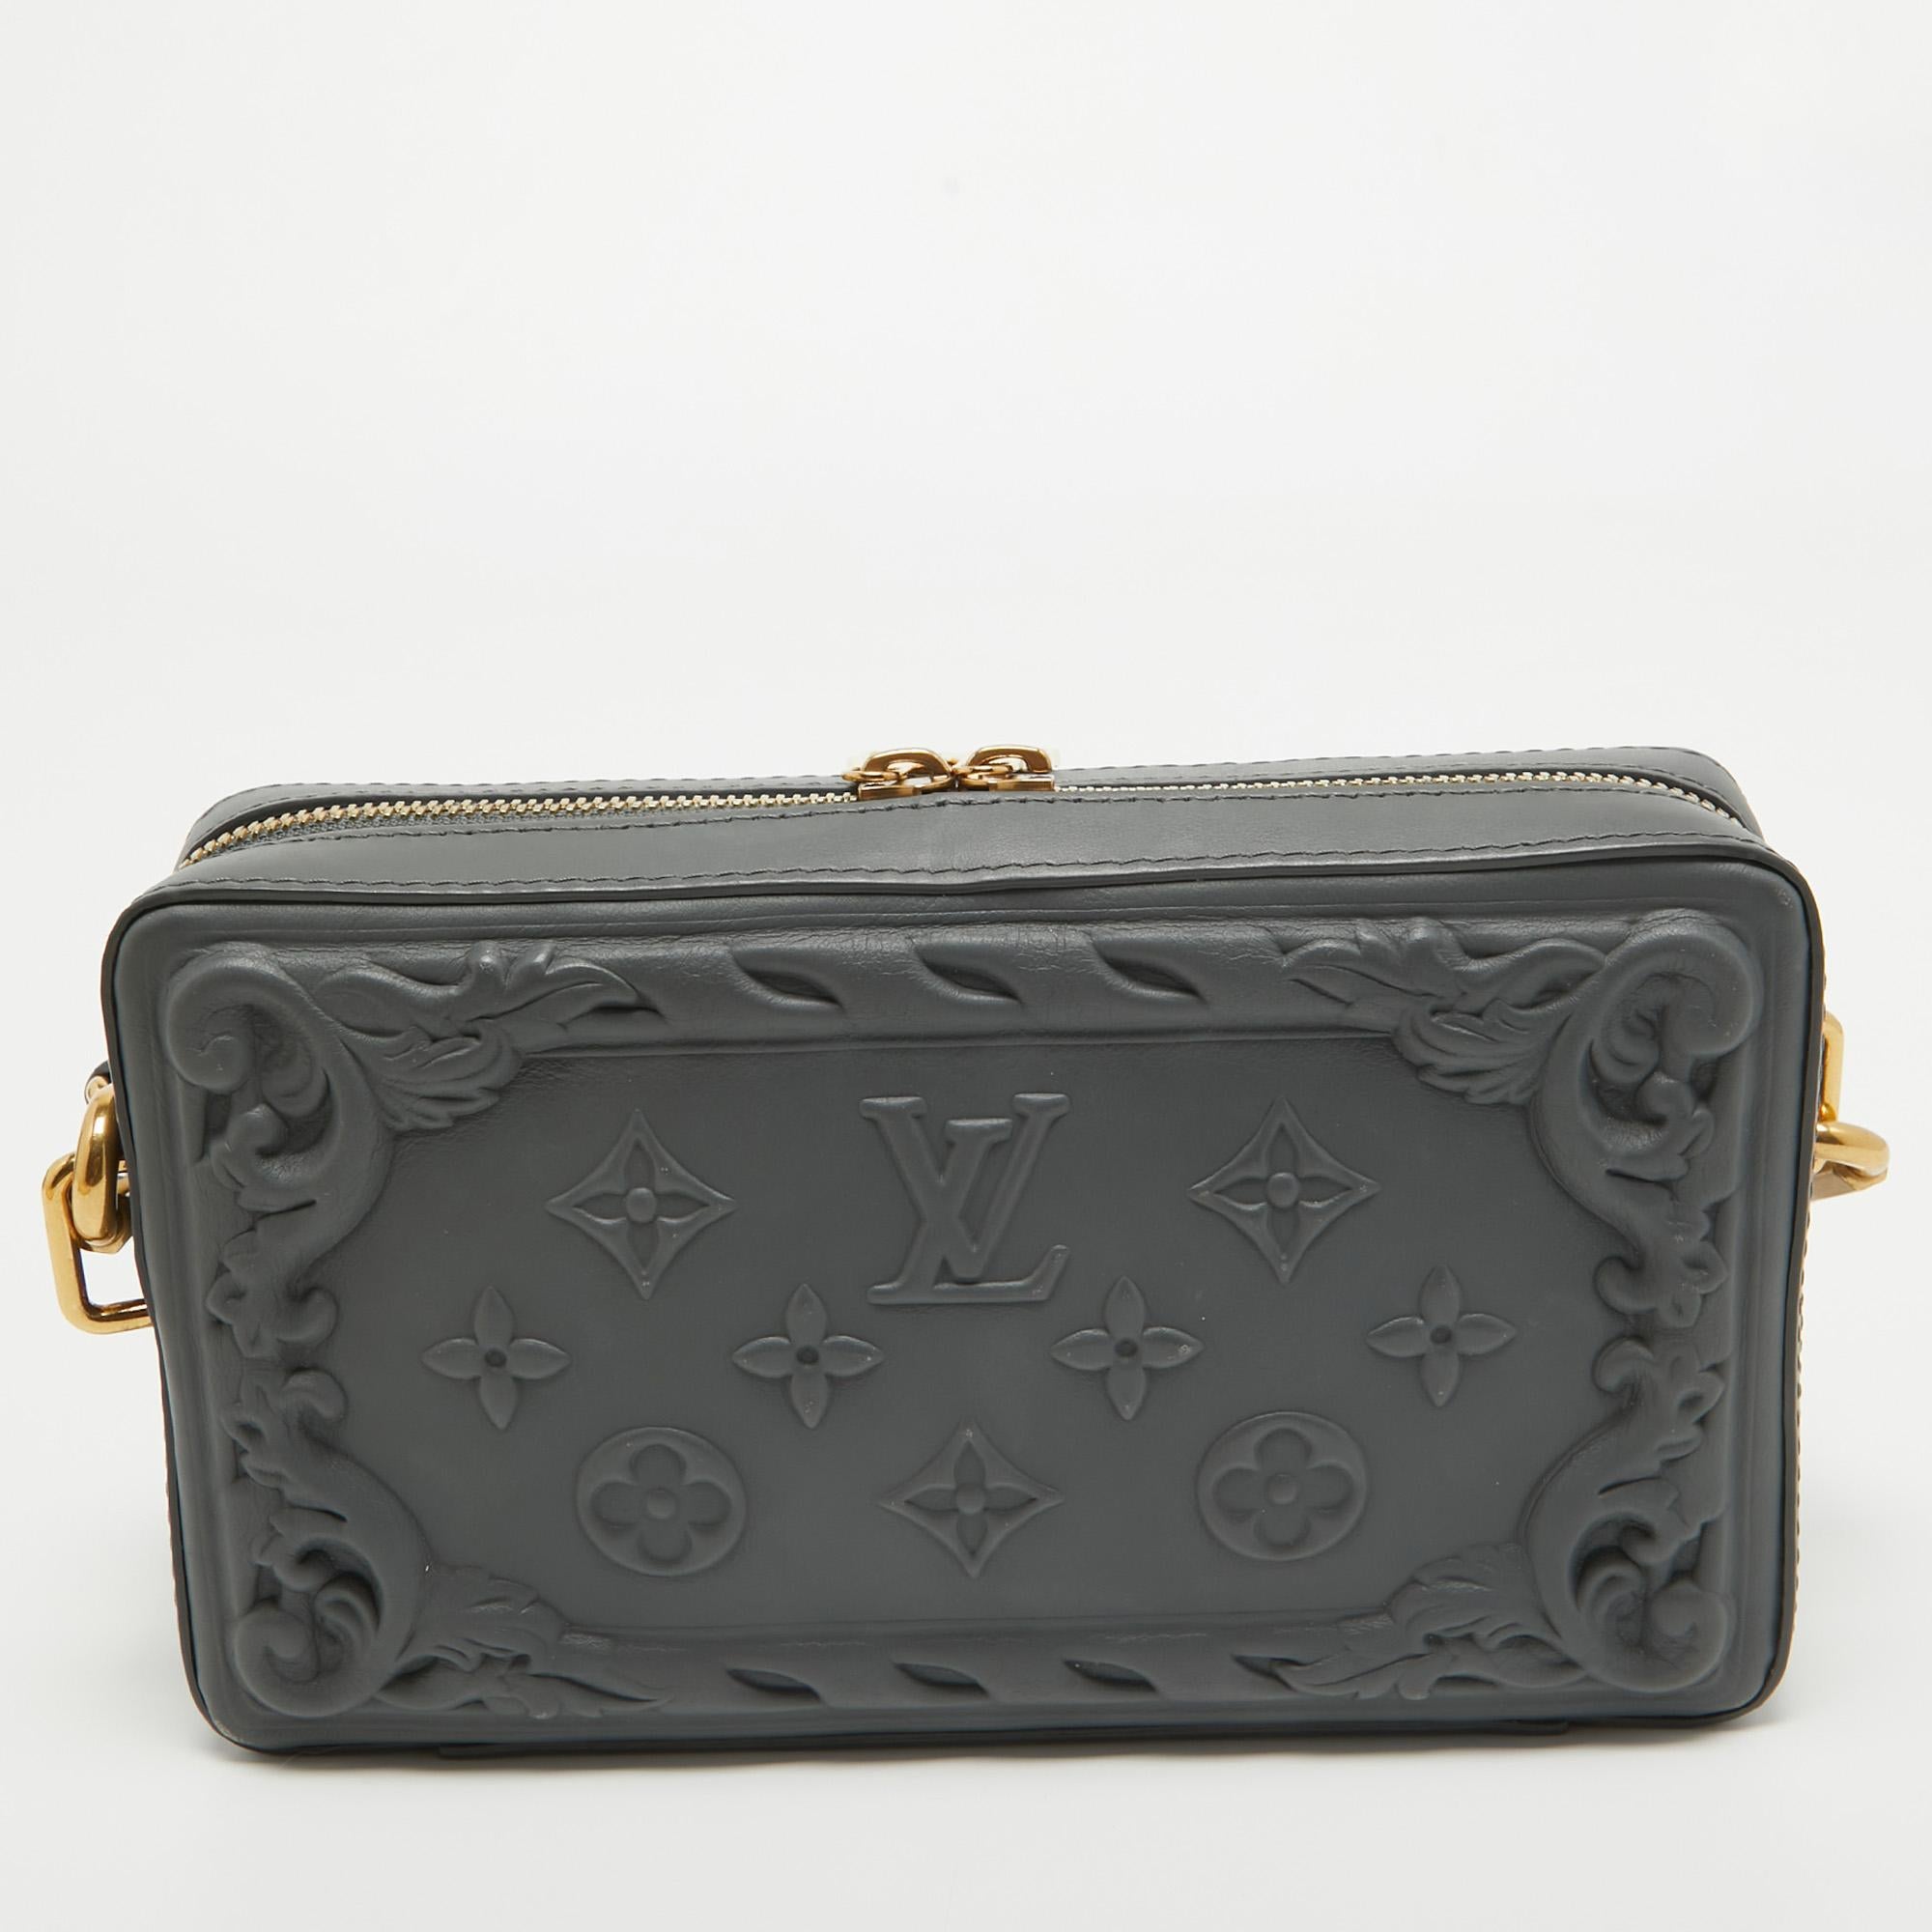 Louis Vuitton's Soft Trunk Wearable Wallet is a beauty from every angle. It is crafted to look like an accent piece but is finished with practical features for you to parade any day. It has a dark grey shade with chateau-inspired debossed details